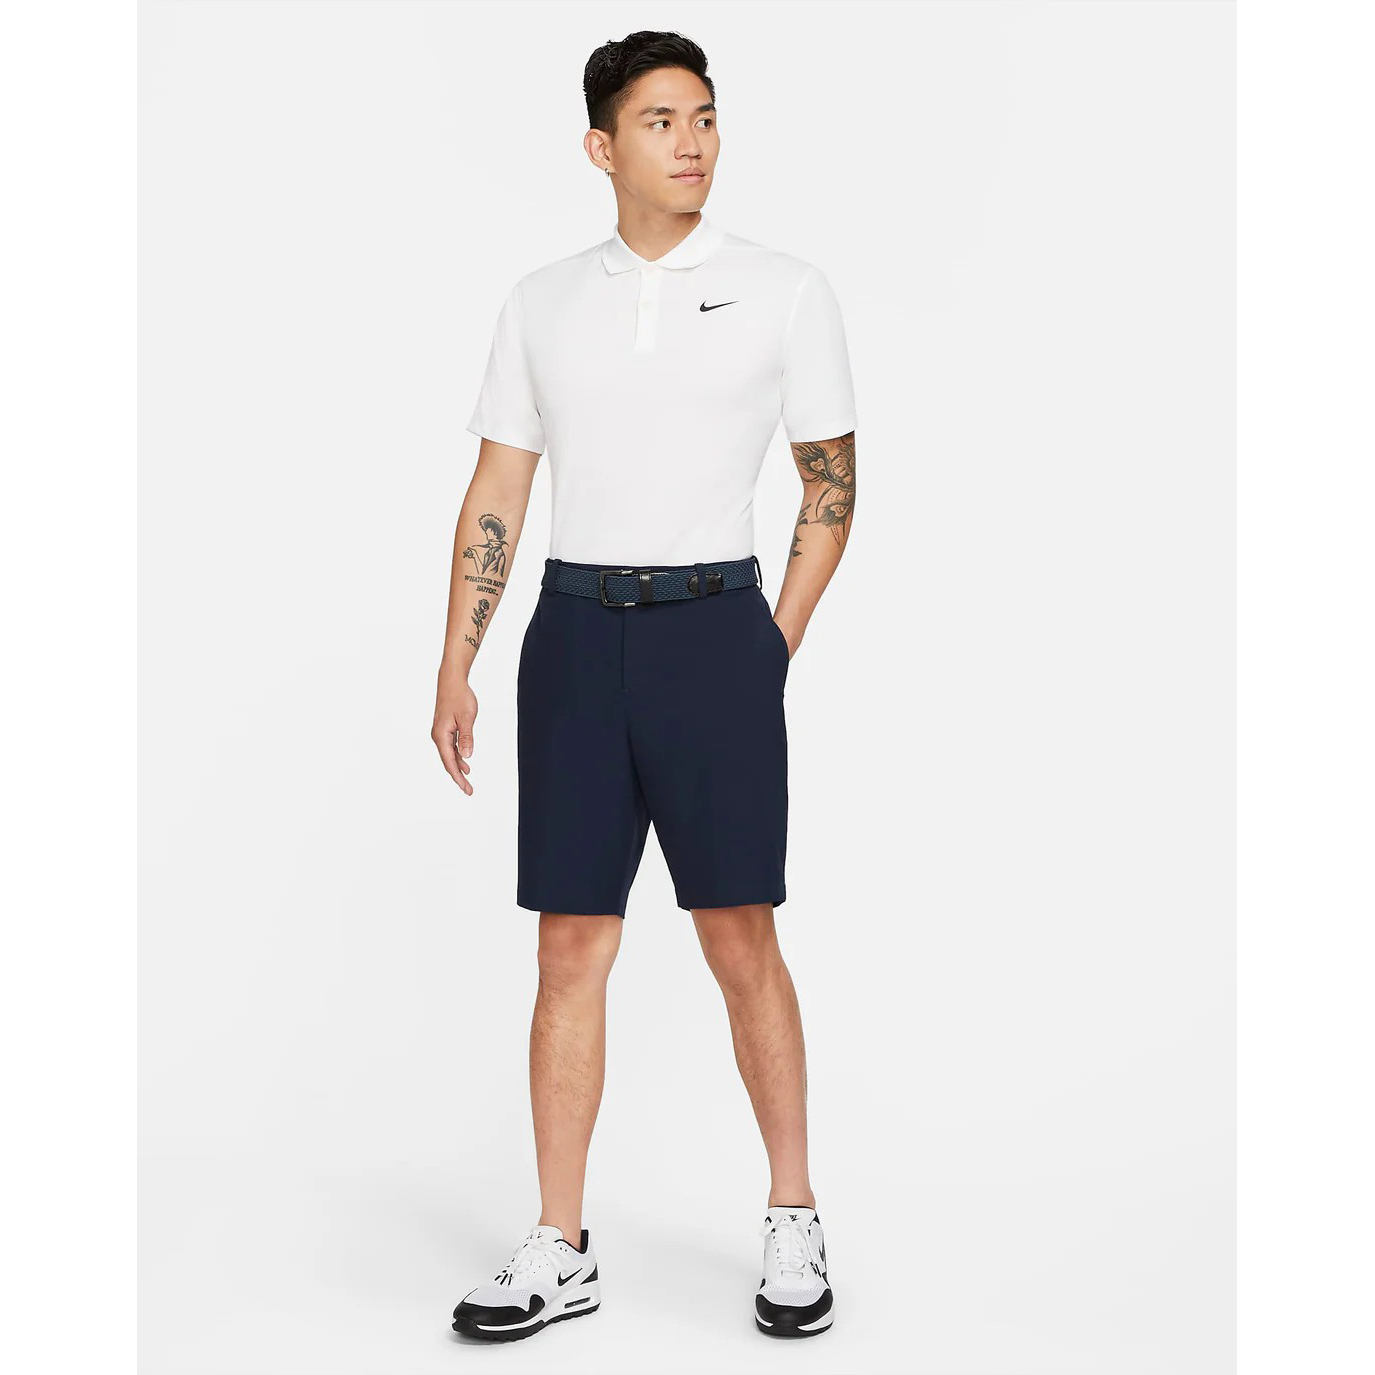 Quần ngắn thể thao nam NIKE AS M NK DF VICTRY 10.5IN SHORT